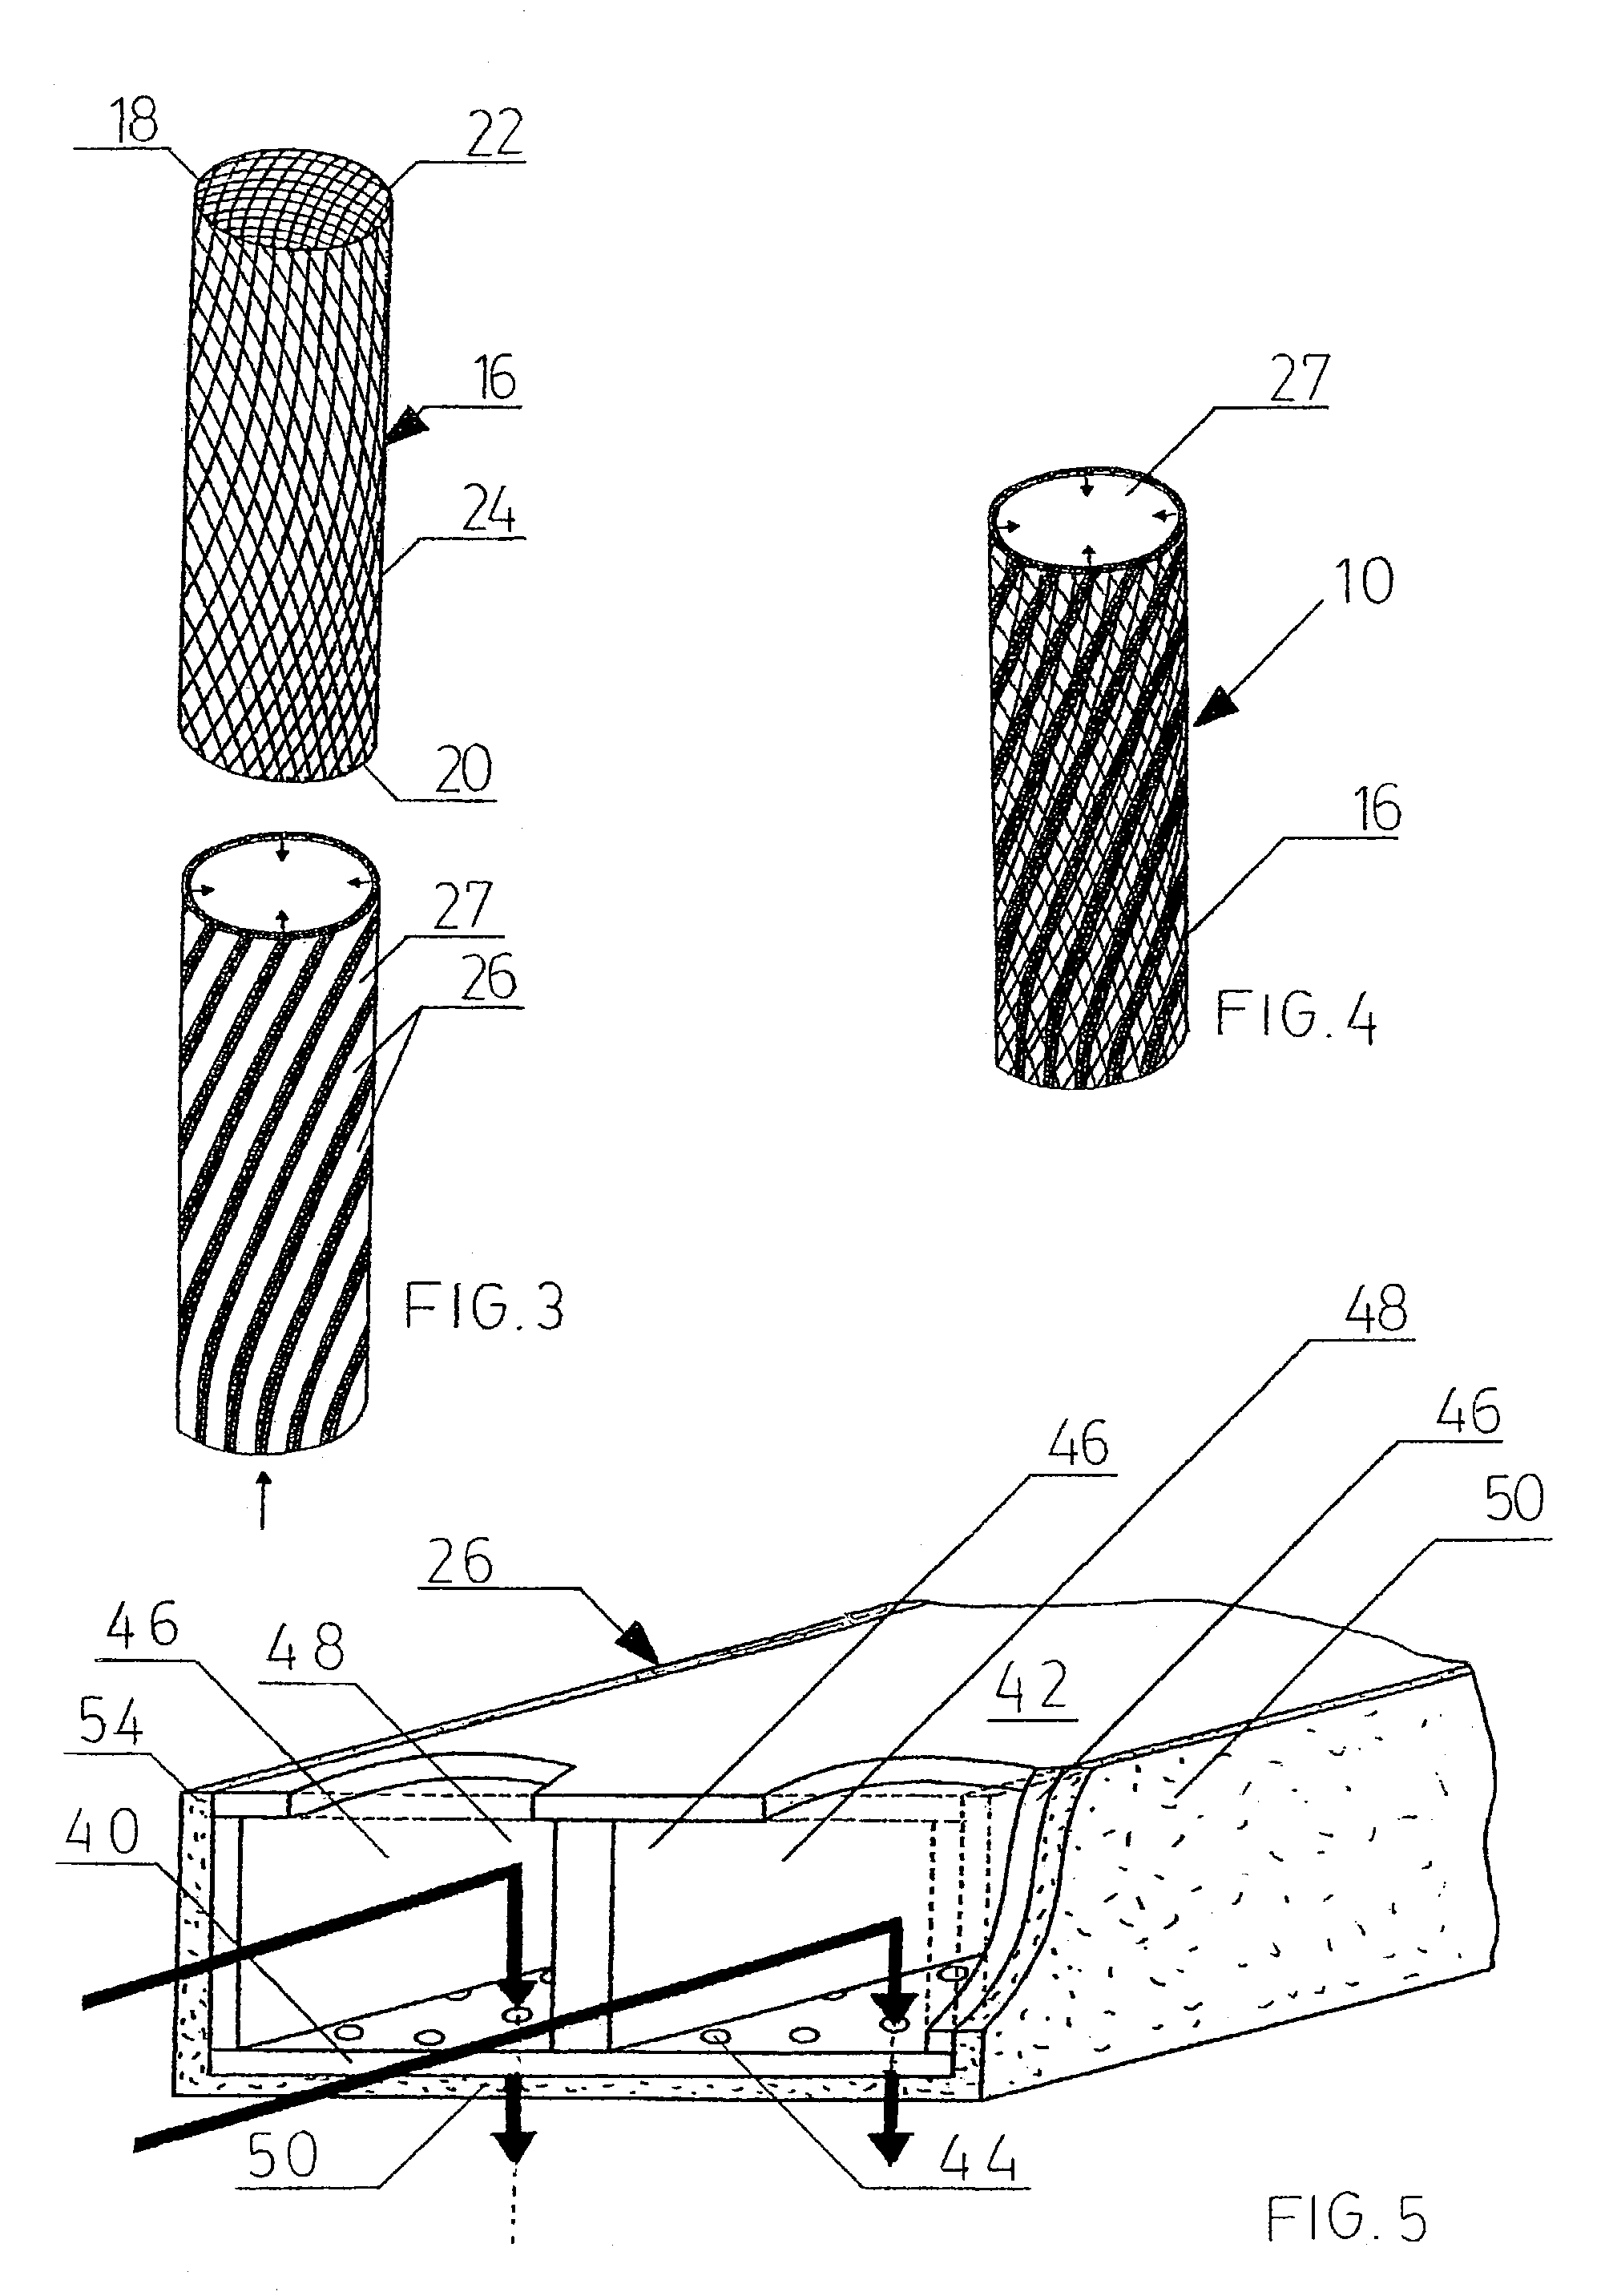 Venting devices for surgical casts and other orthopedic devices